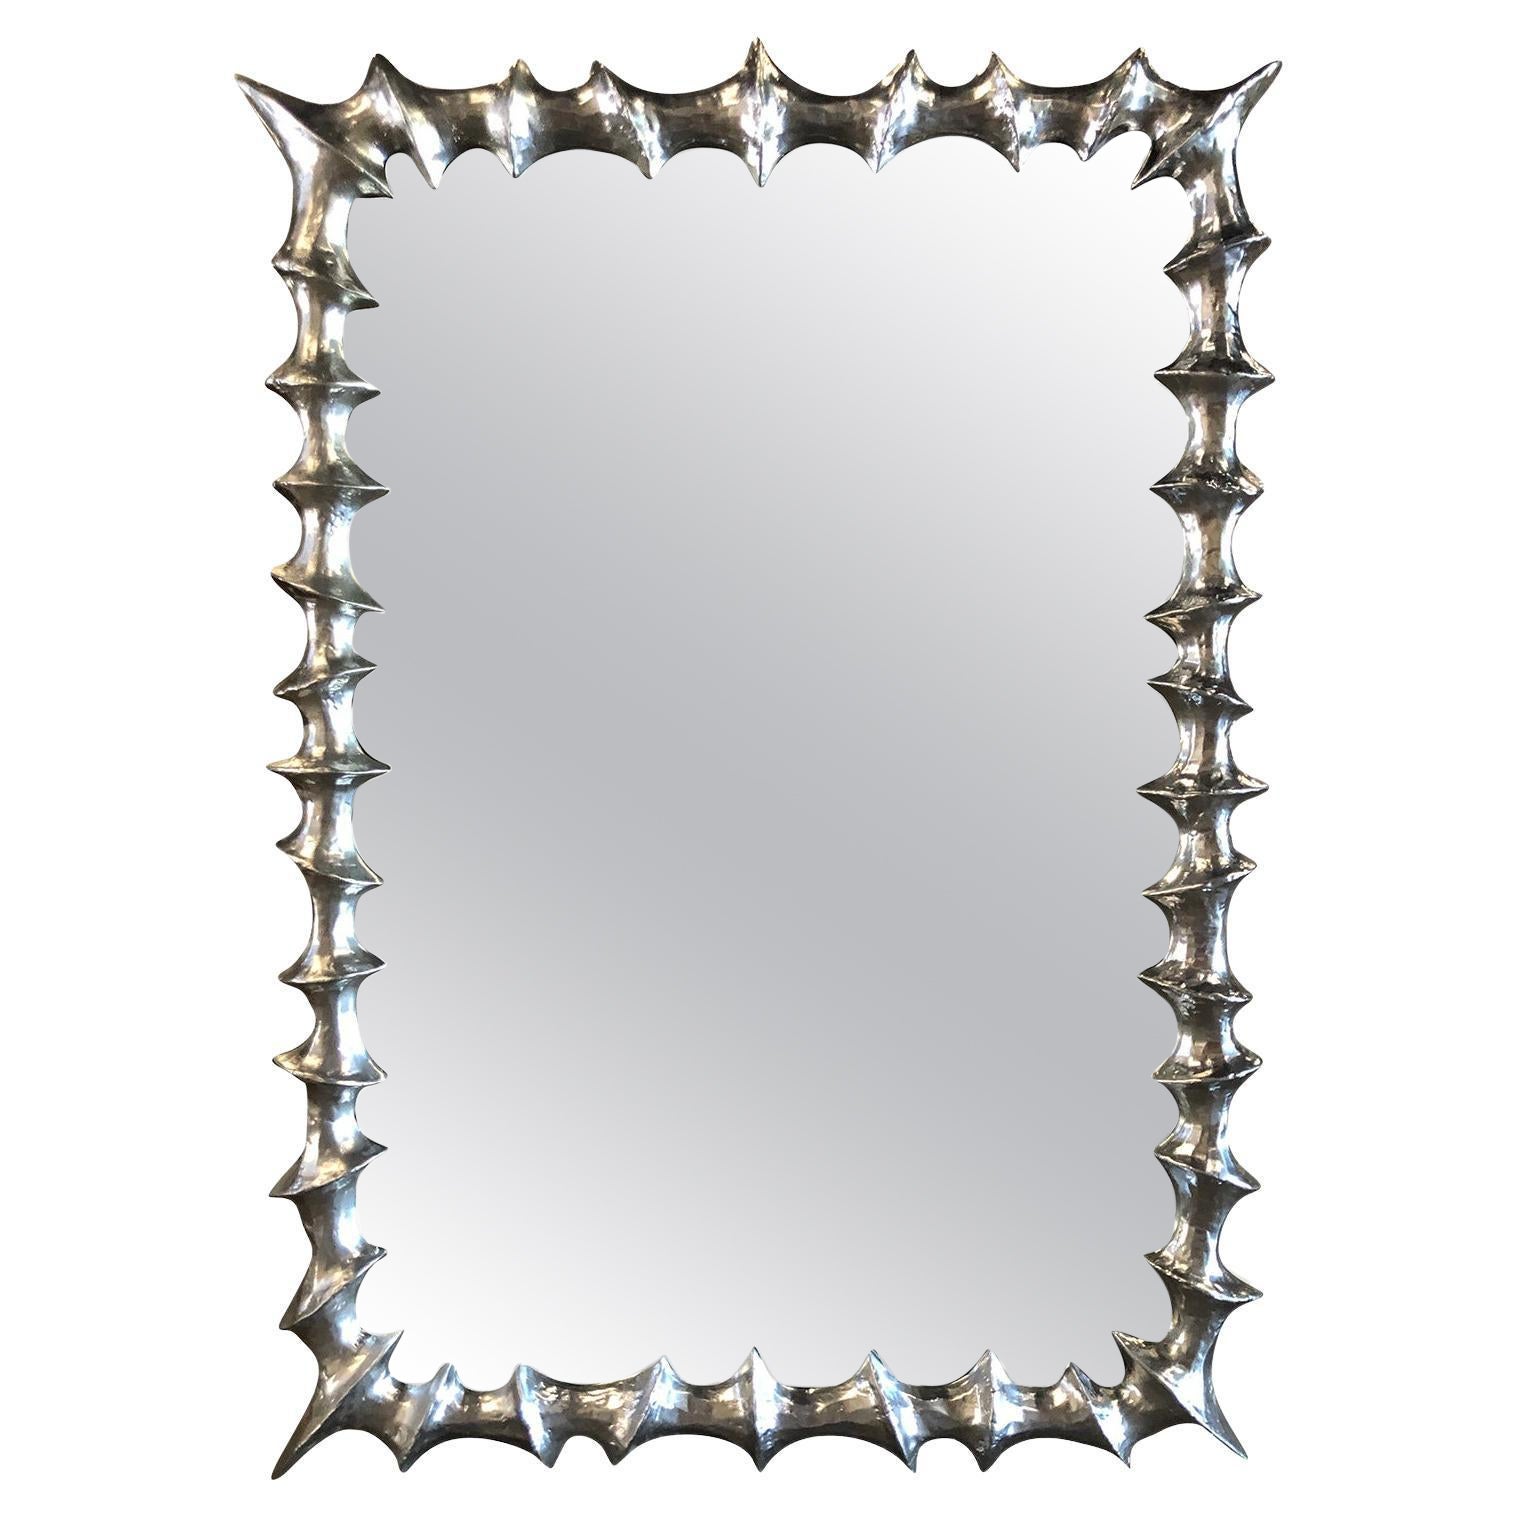 21st Century Silver French Metal Wall Glass Mirror, Miroir Corentin, Wall Décor For Sale